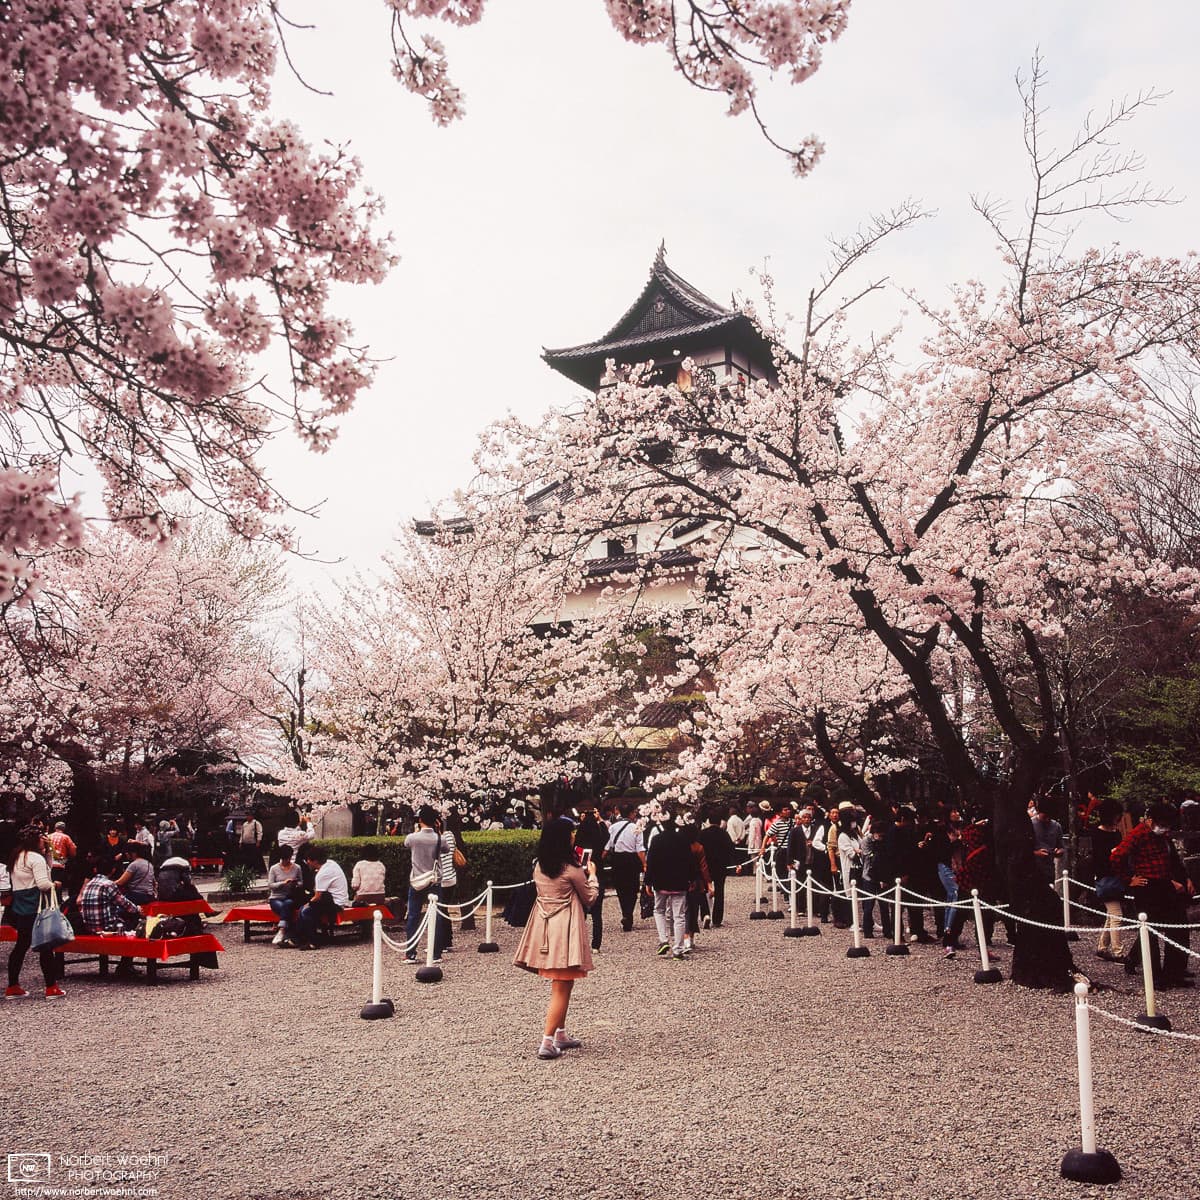 The inner yard of Inuyama Castle north of Nagoya, Japan, during the Cherry Blossom Season.